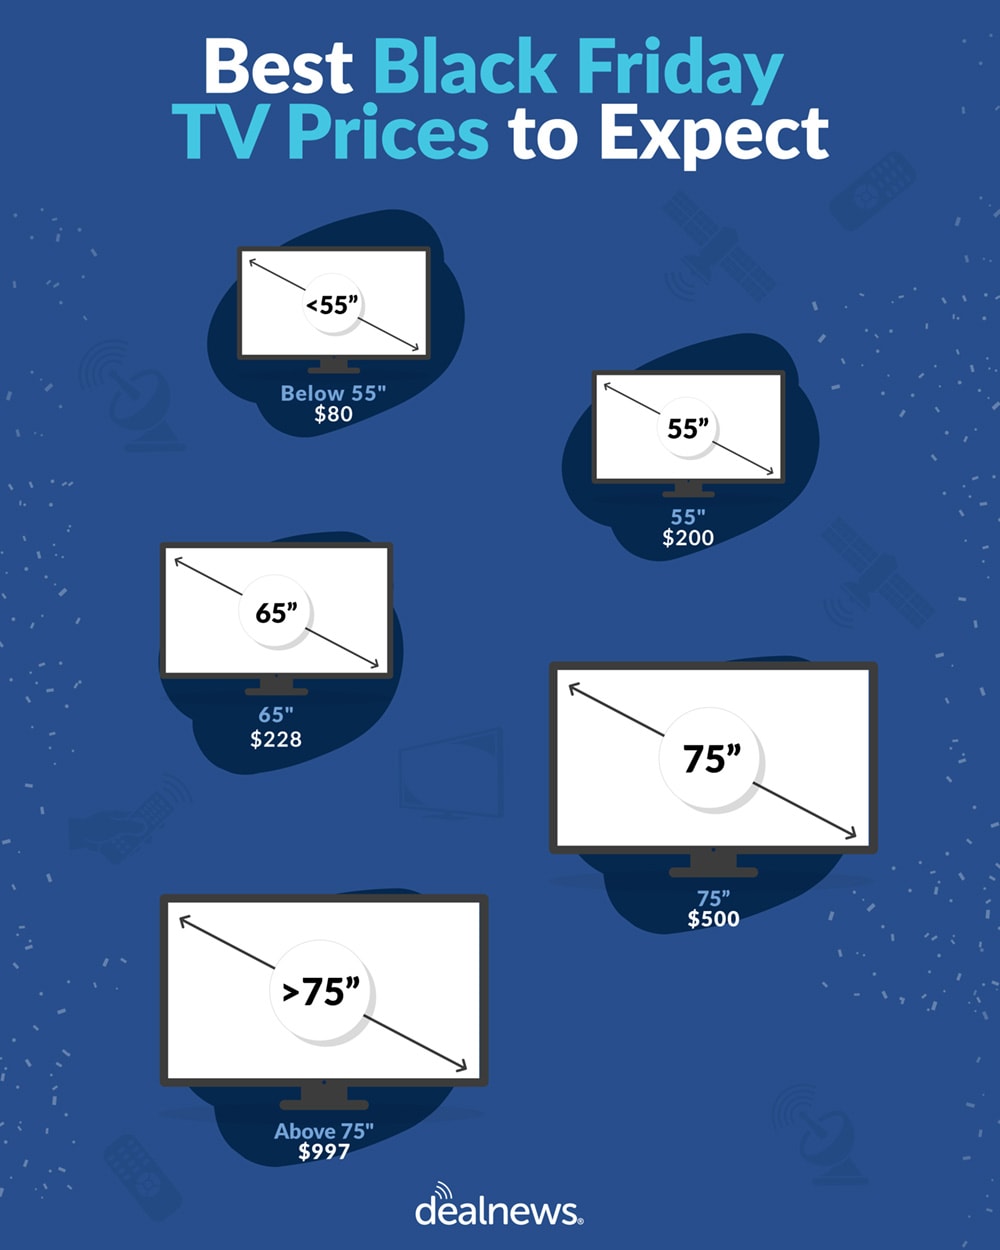 Best Black Friday TV prices to expect in 2023 shown in infographic.